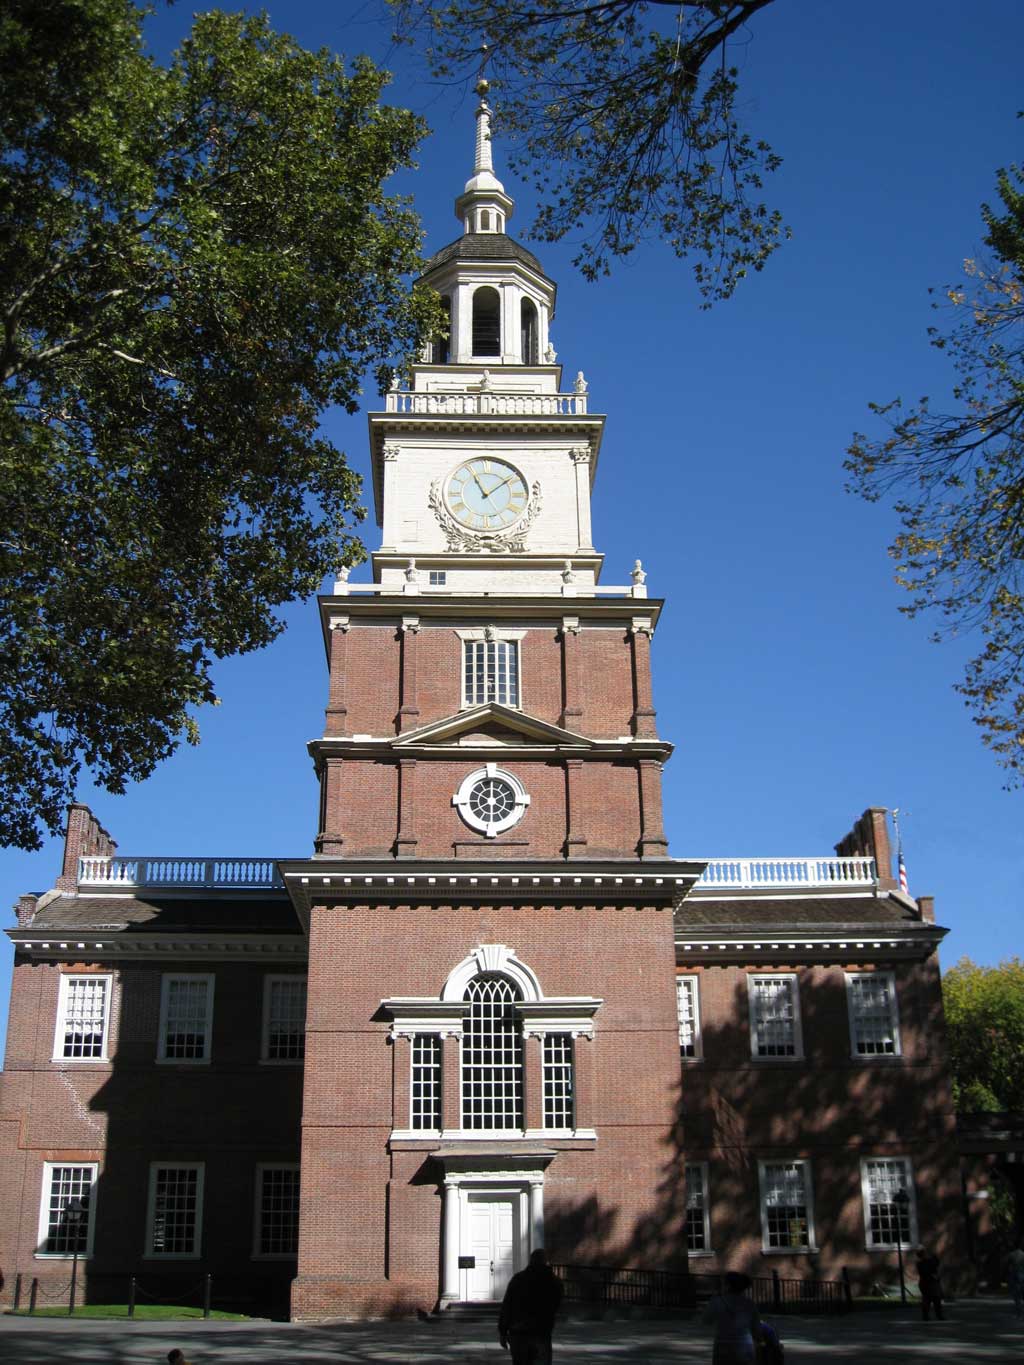 The front of the clock tower at Independence Hall